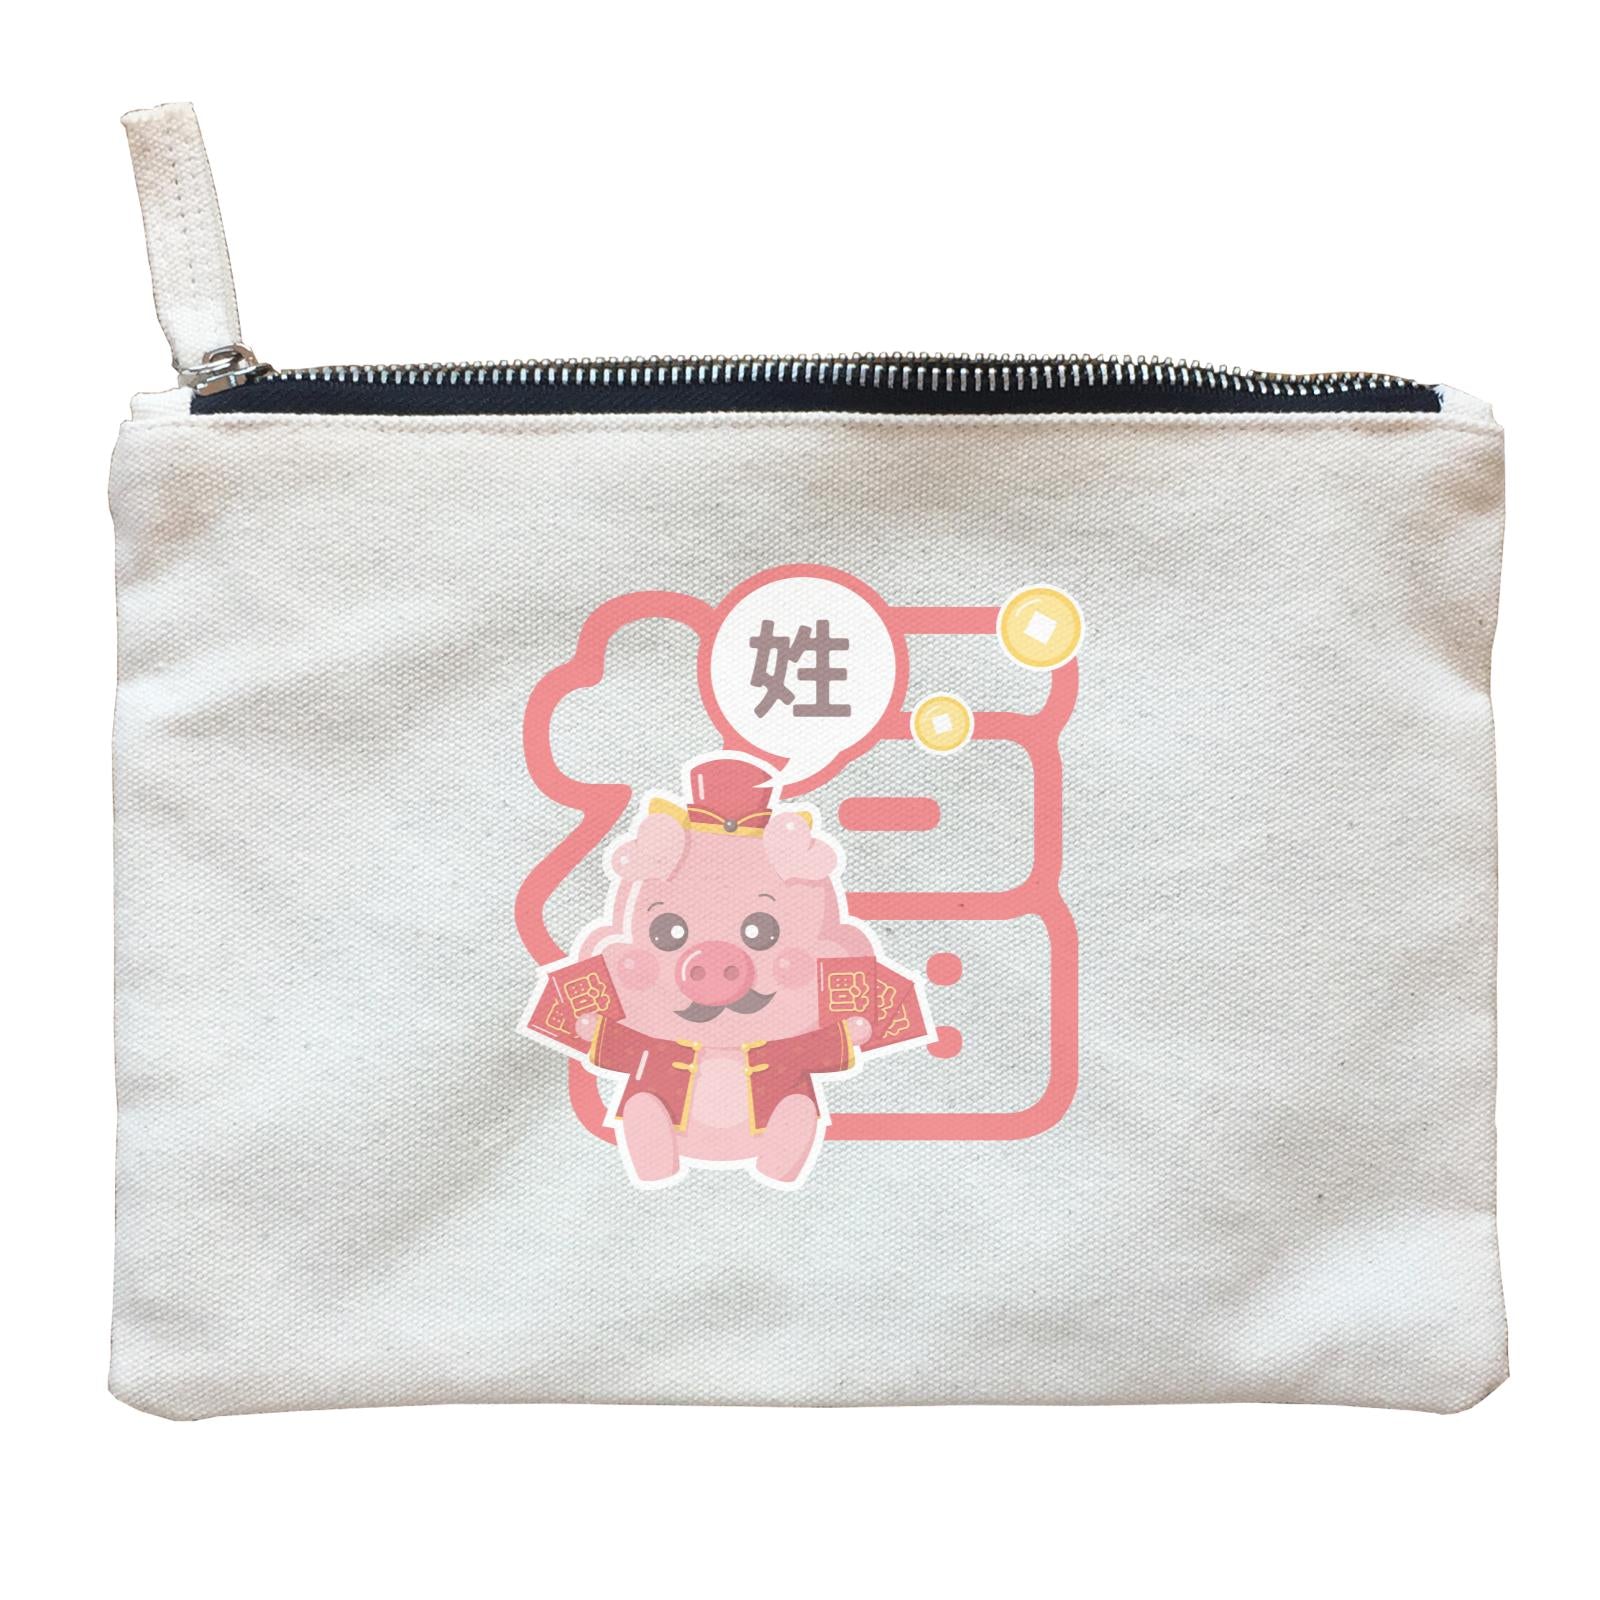 Chinese New Year Cute Pig Good Fortune Dad Accessories With Addname Zipper Pouch